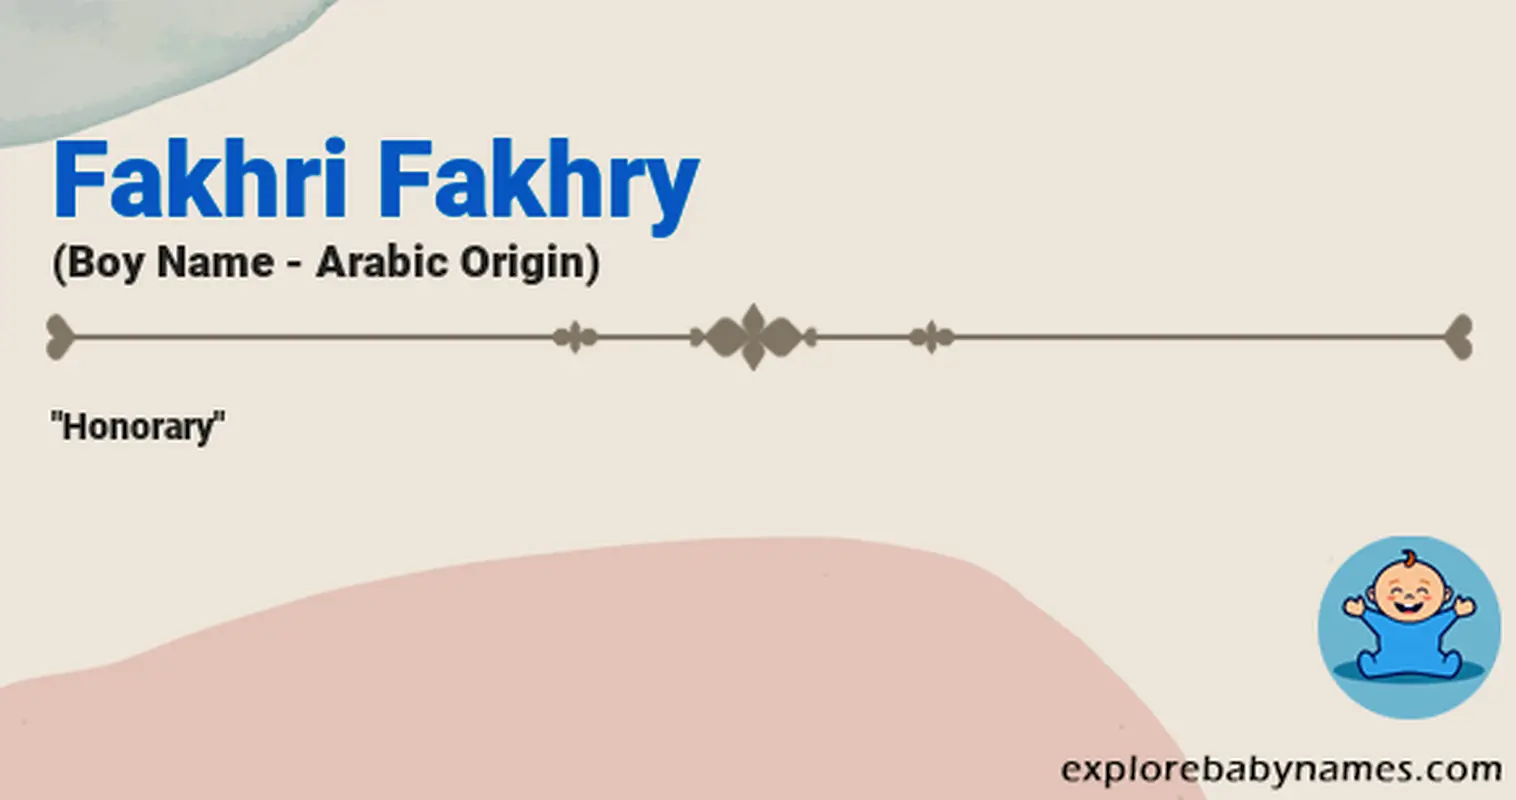 Meaning of Fakhri Fakhry